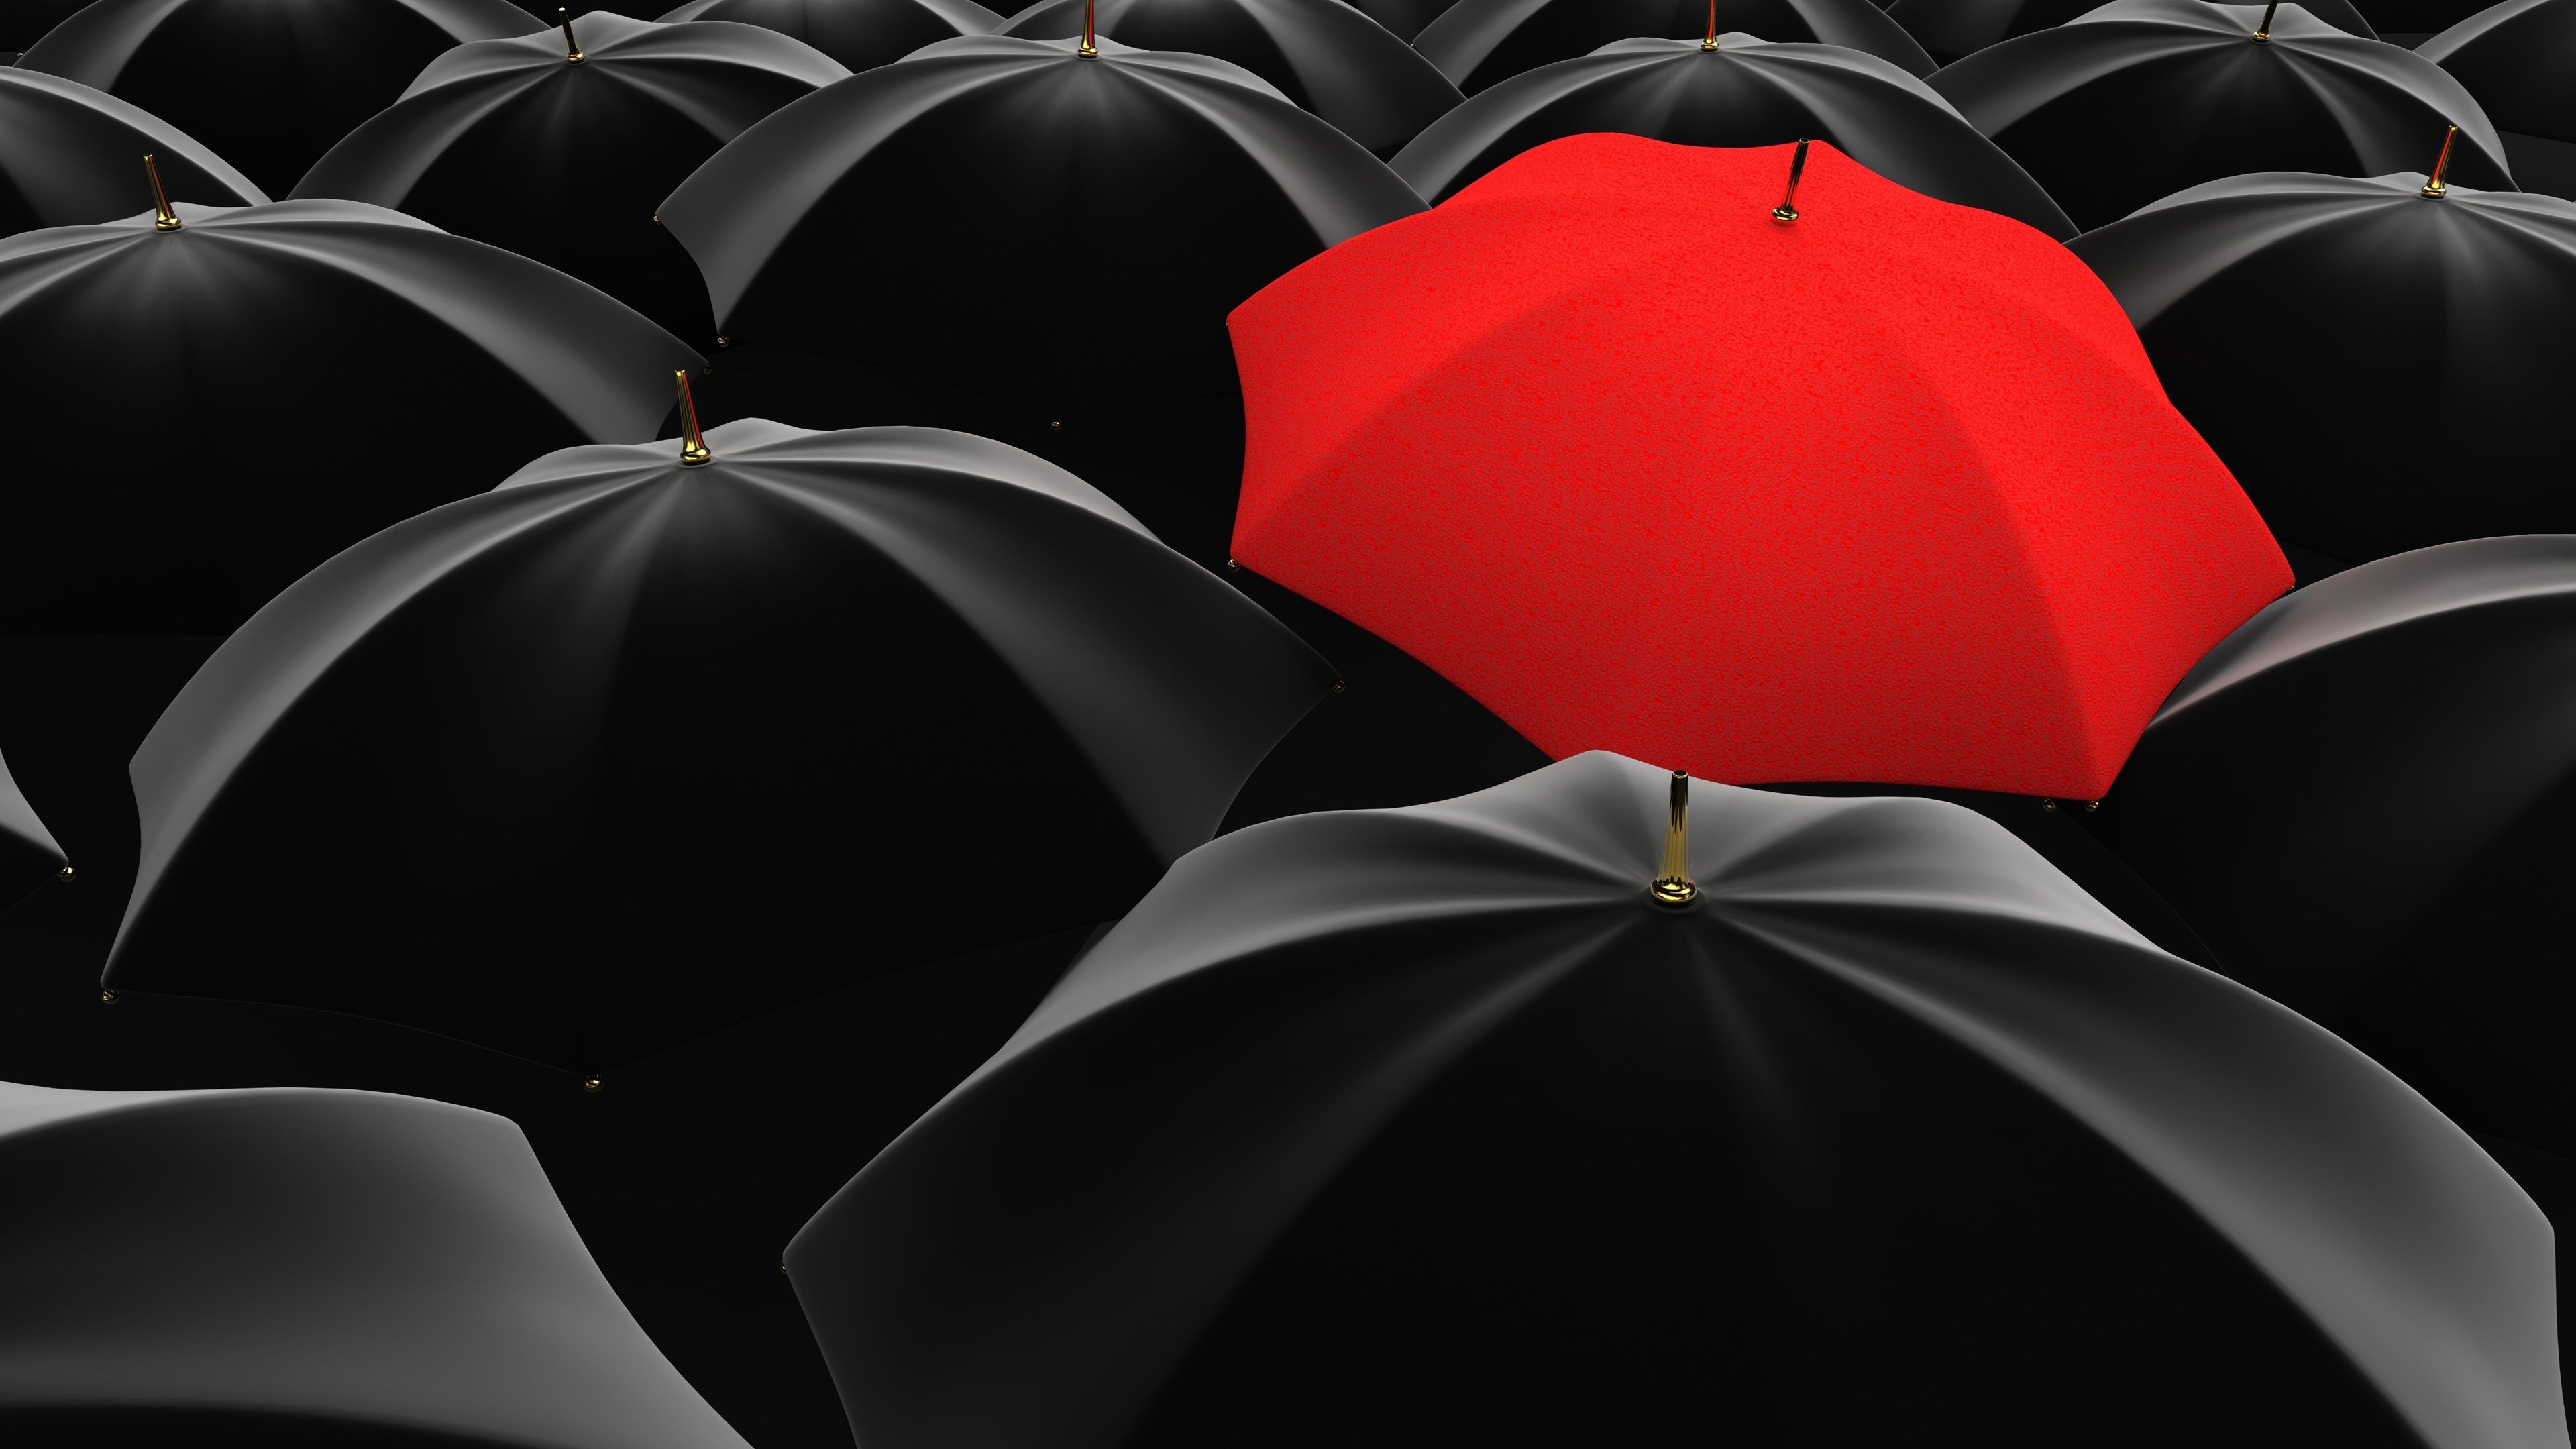 Wallpaper Many black umbrellas, one red 3840x2160 UHD 4K Picture, Image